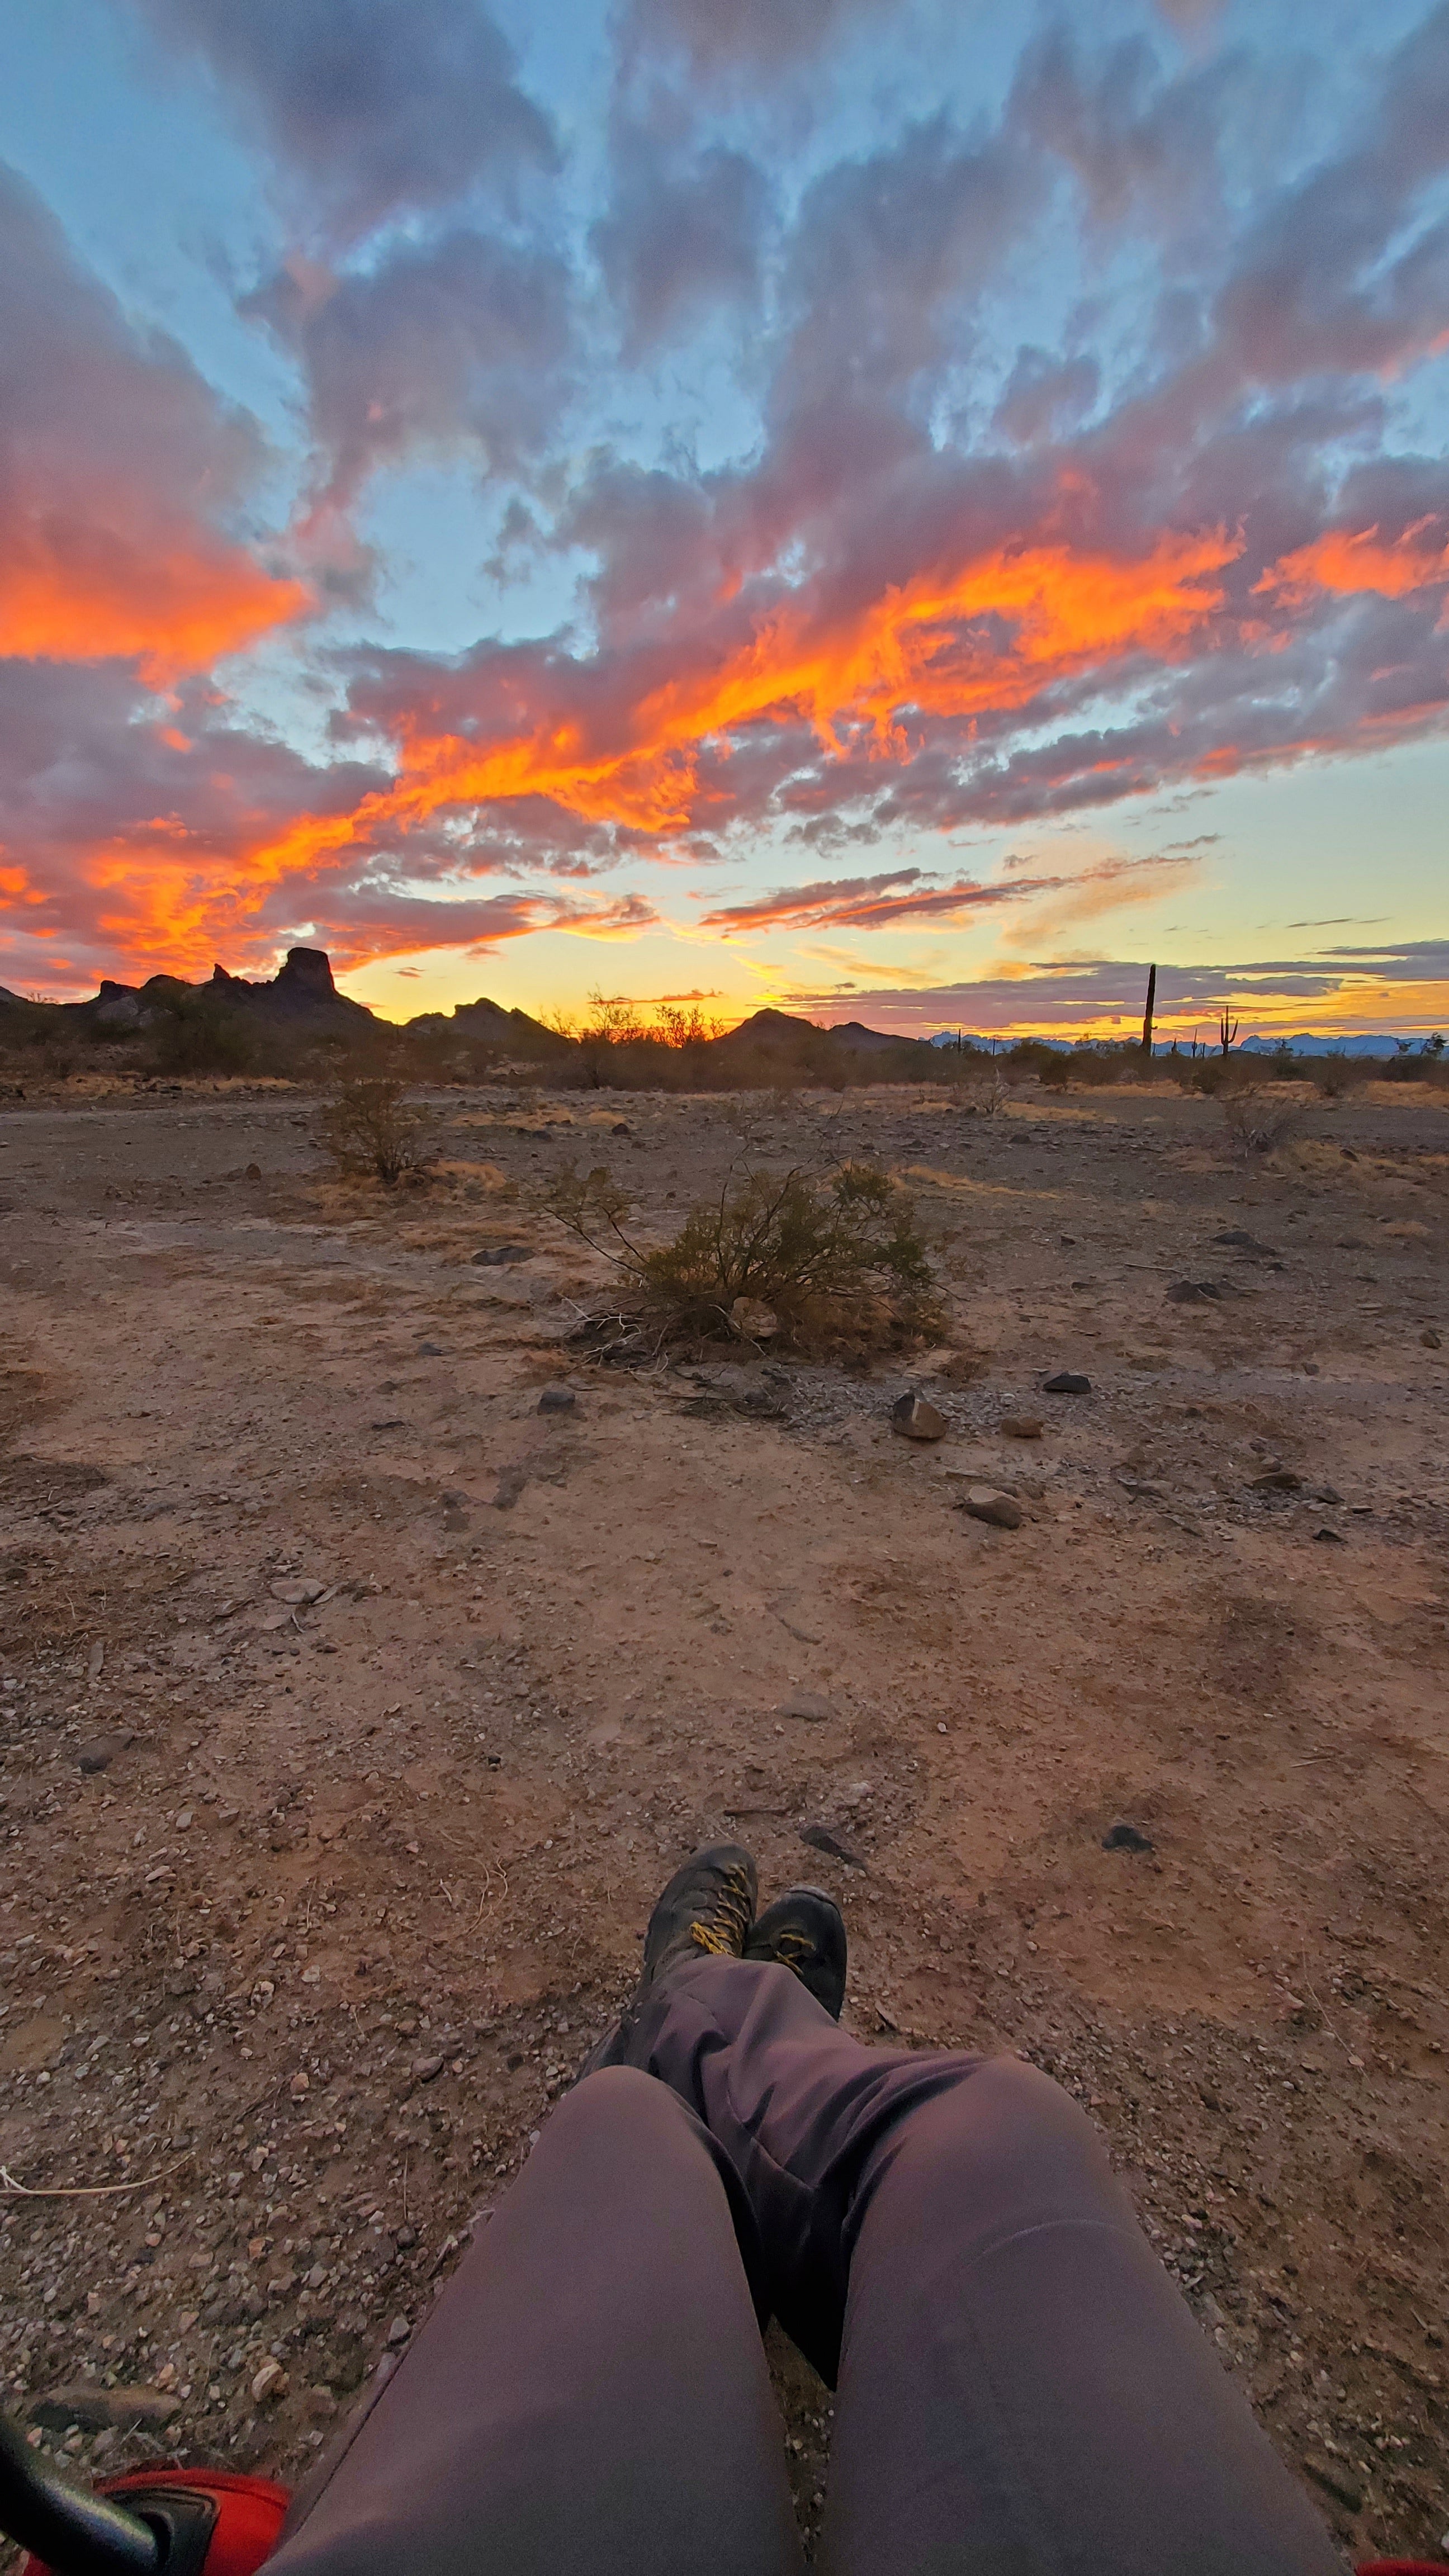 Camper submitted image from Saddle Mountain BLM (Tonopah, AZ) - 4